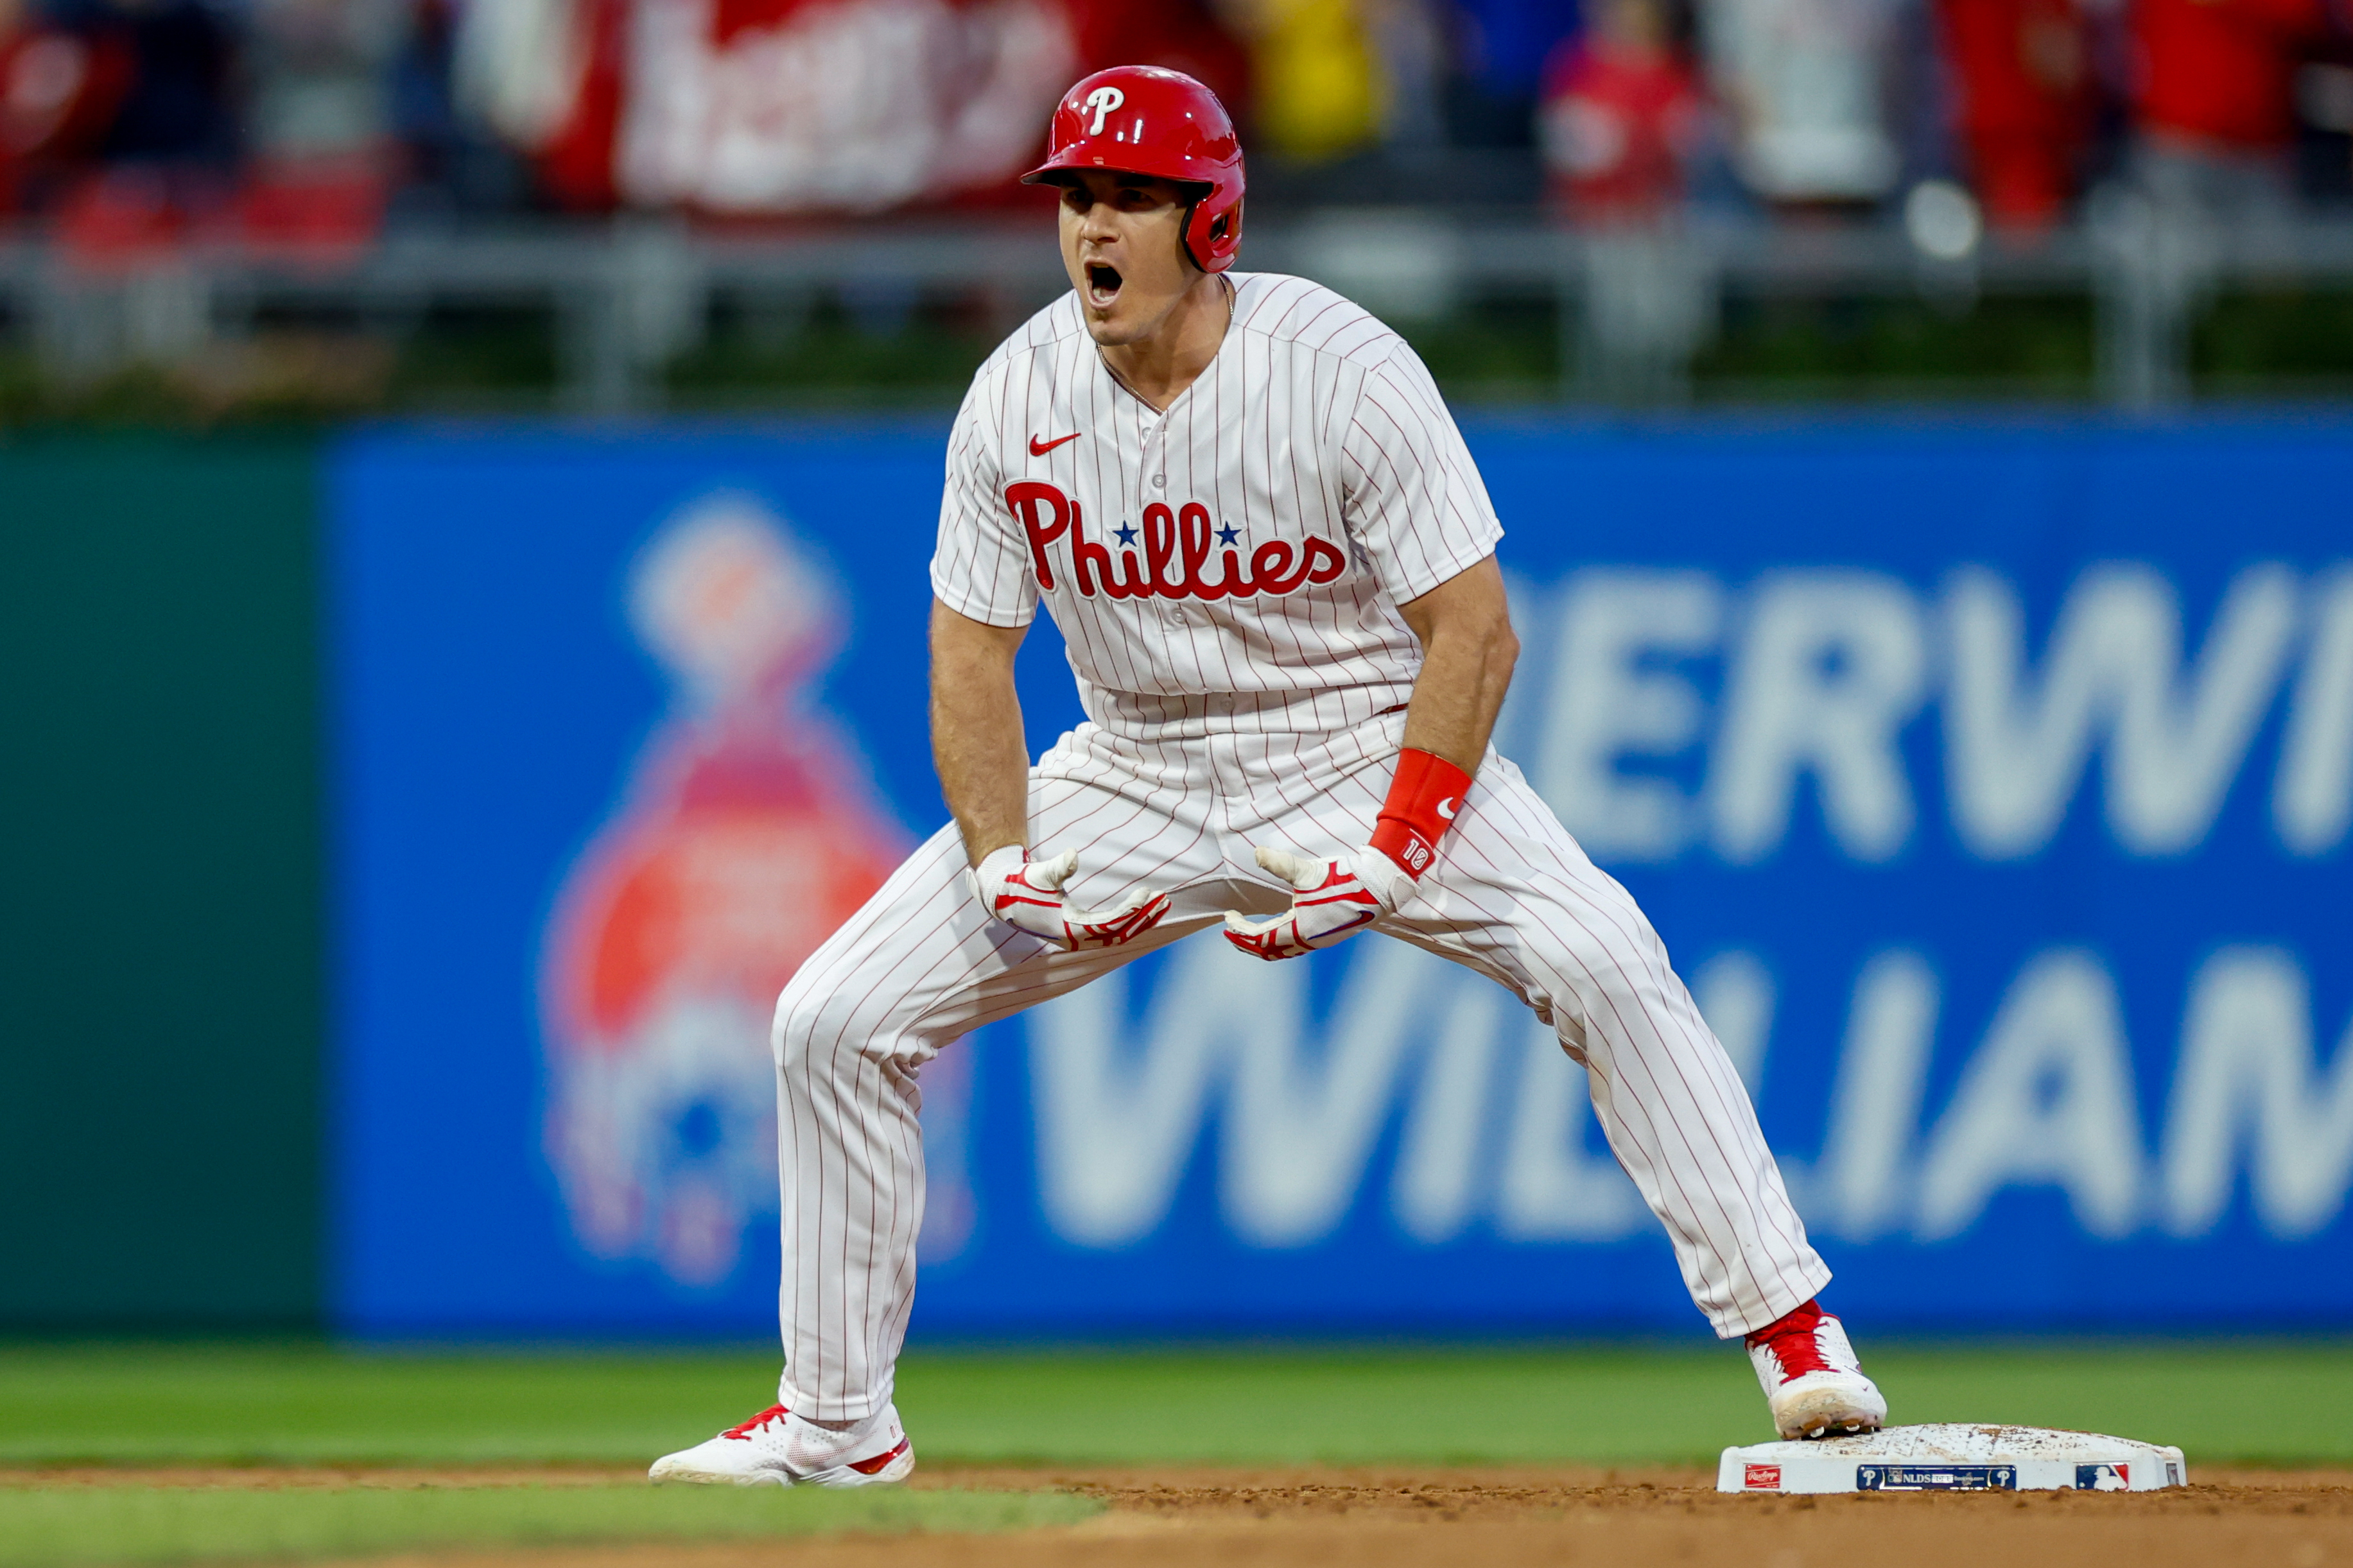 Phillies pitchers dominate again, sweep Braves on Bohm's late-game hit